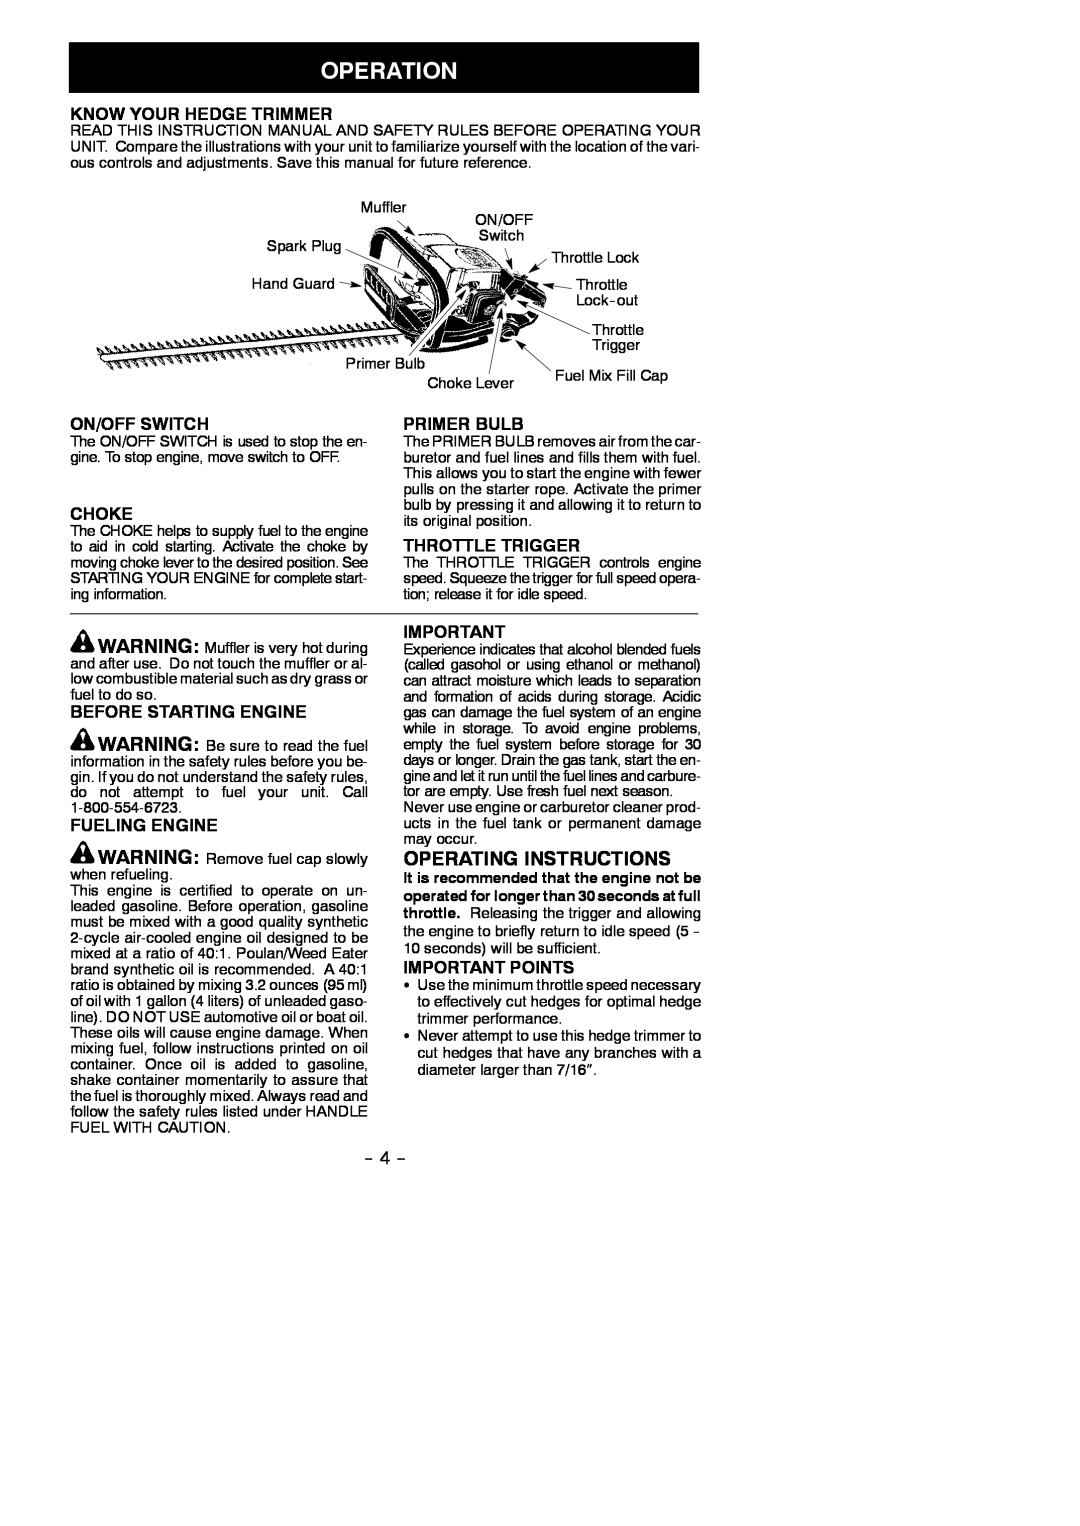 Poulan GHT 225, GHT 195 Operation, Operating Instructions, Know Your Hedge Trimmer, On/Off Switch, Primer Bulb, Choke 